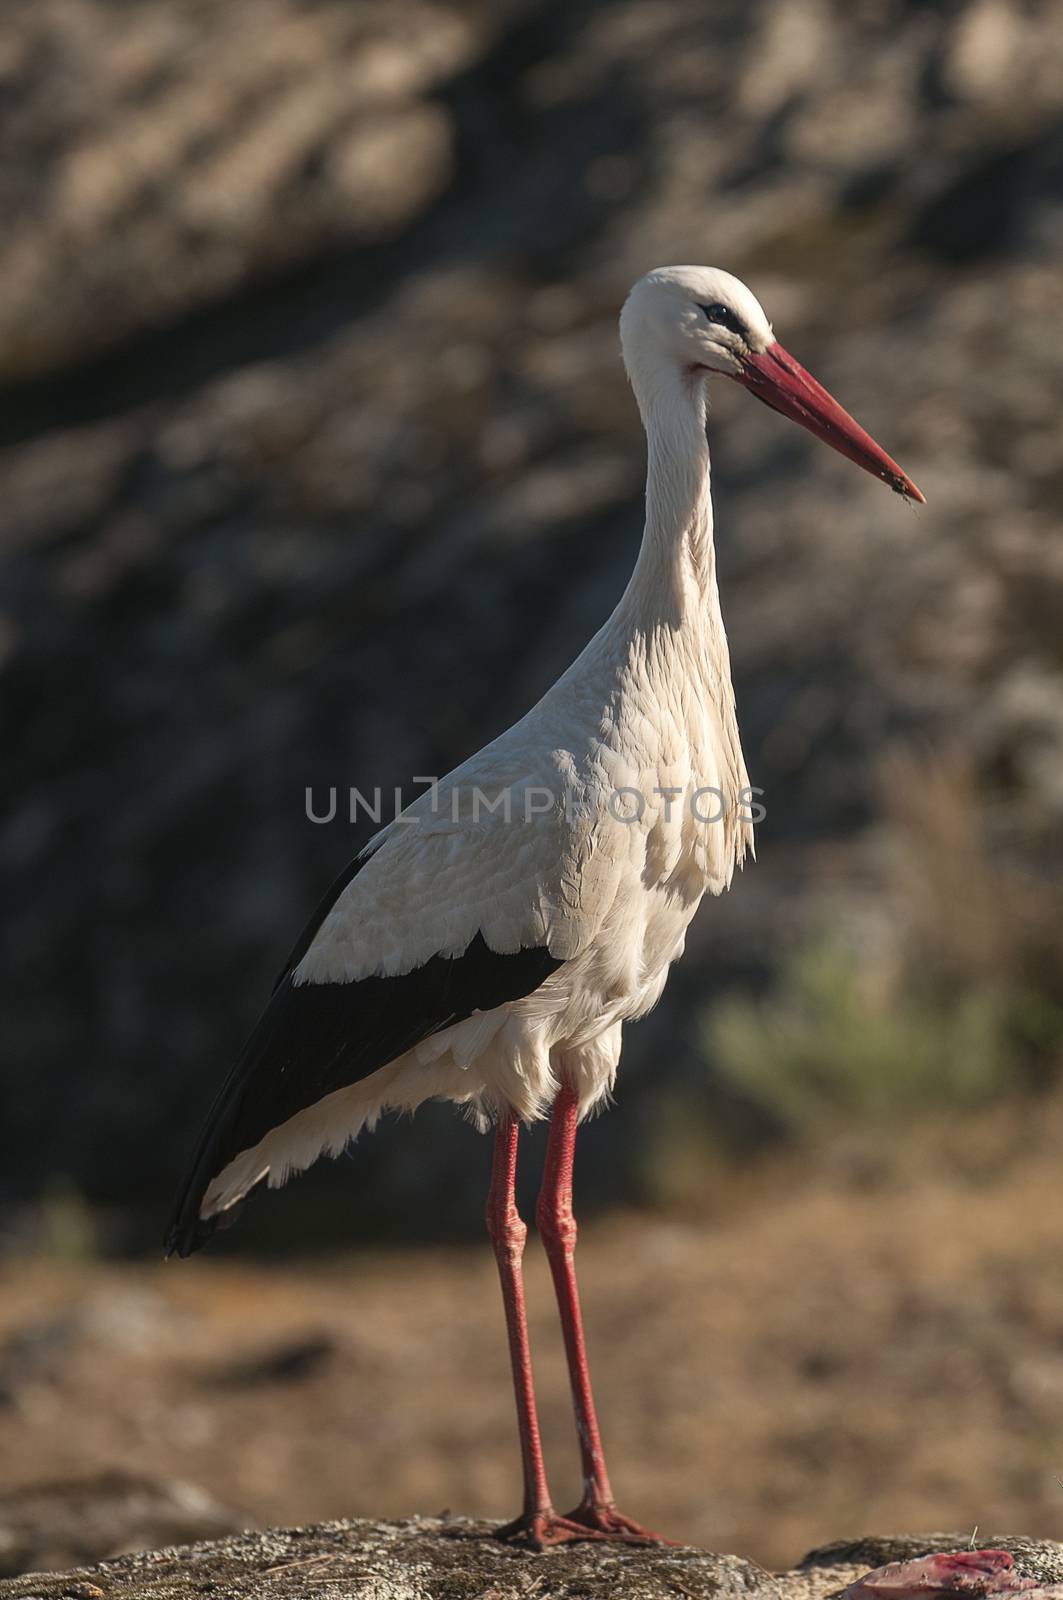 White stork standing on the rocks (Ciconia ciconia) by jalonsohu@gmail.com